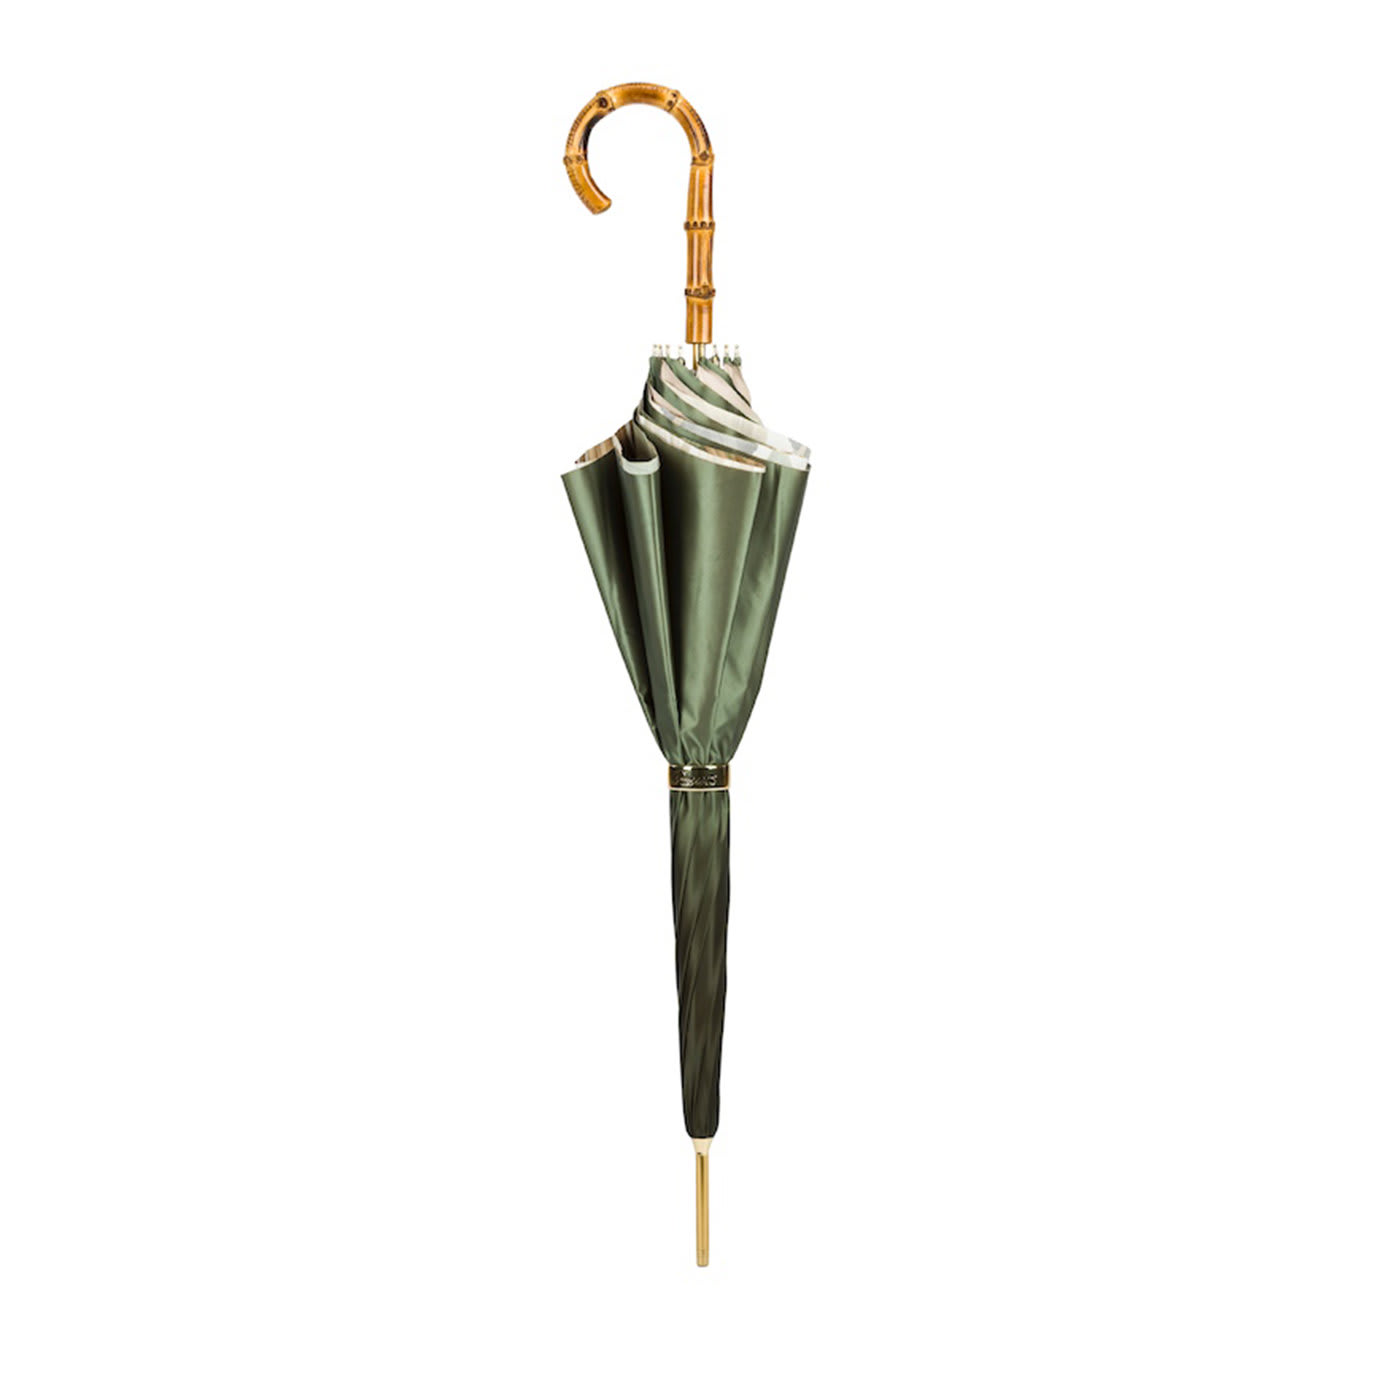 Tropical Umbrella with Bamboo Handle - Double Cloth - Pasotti